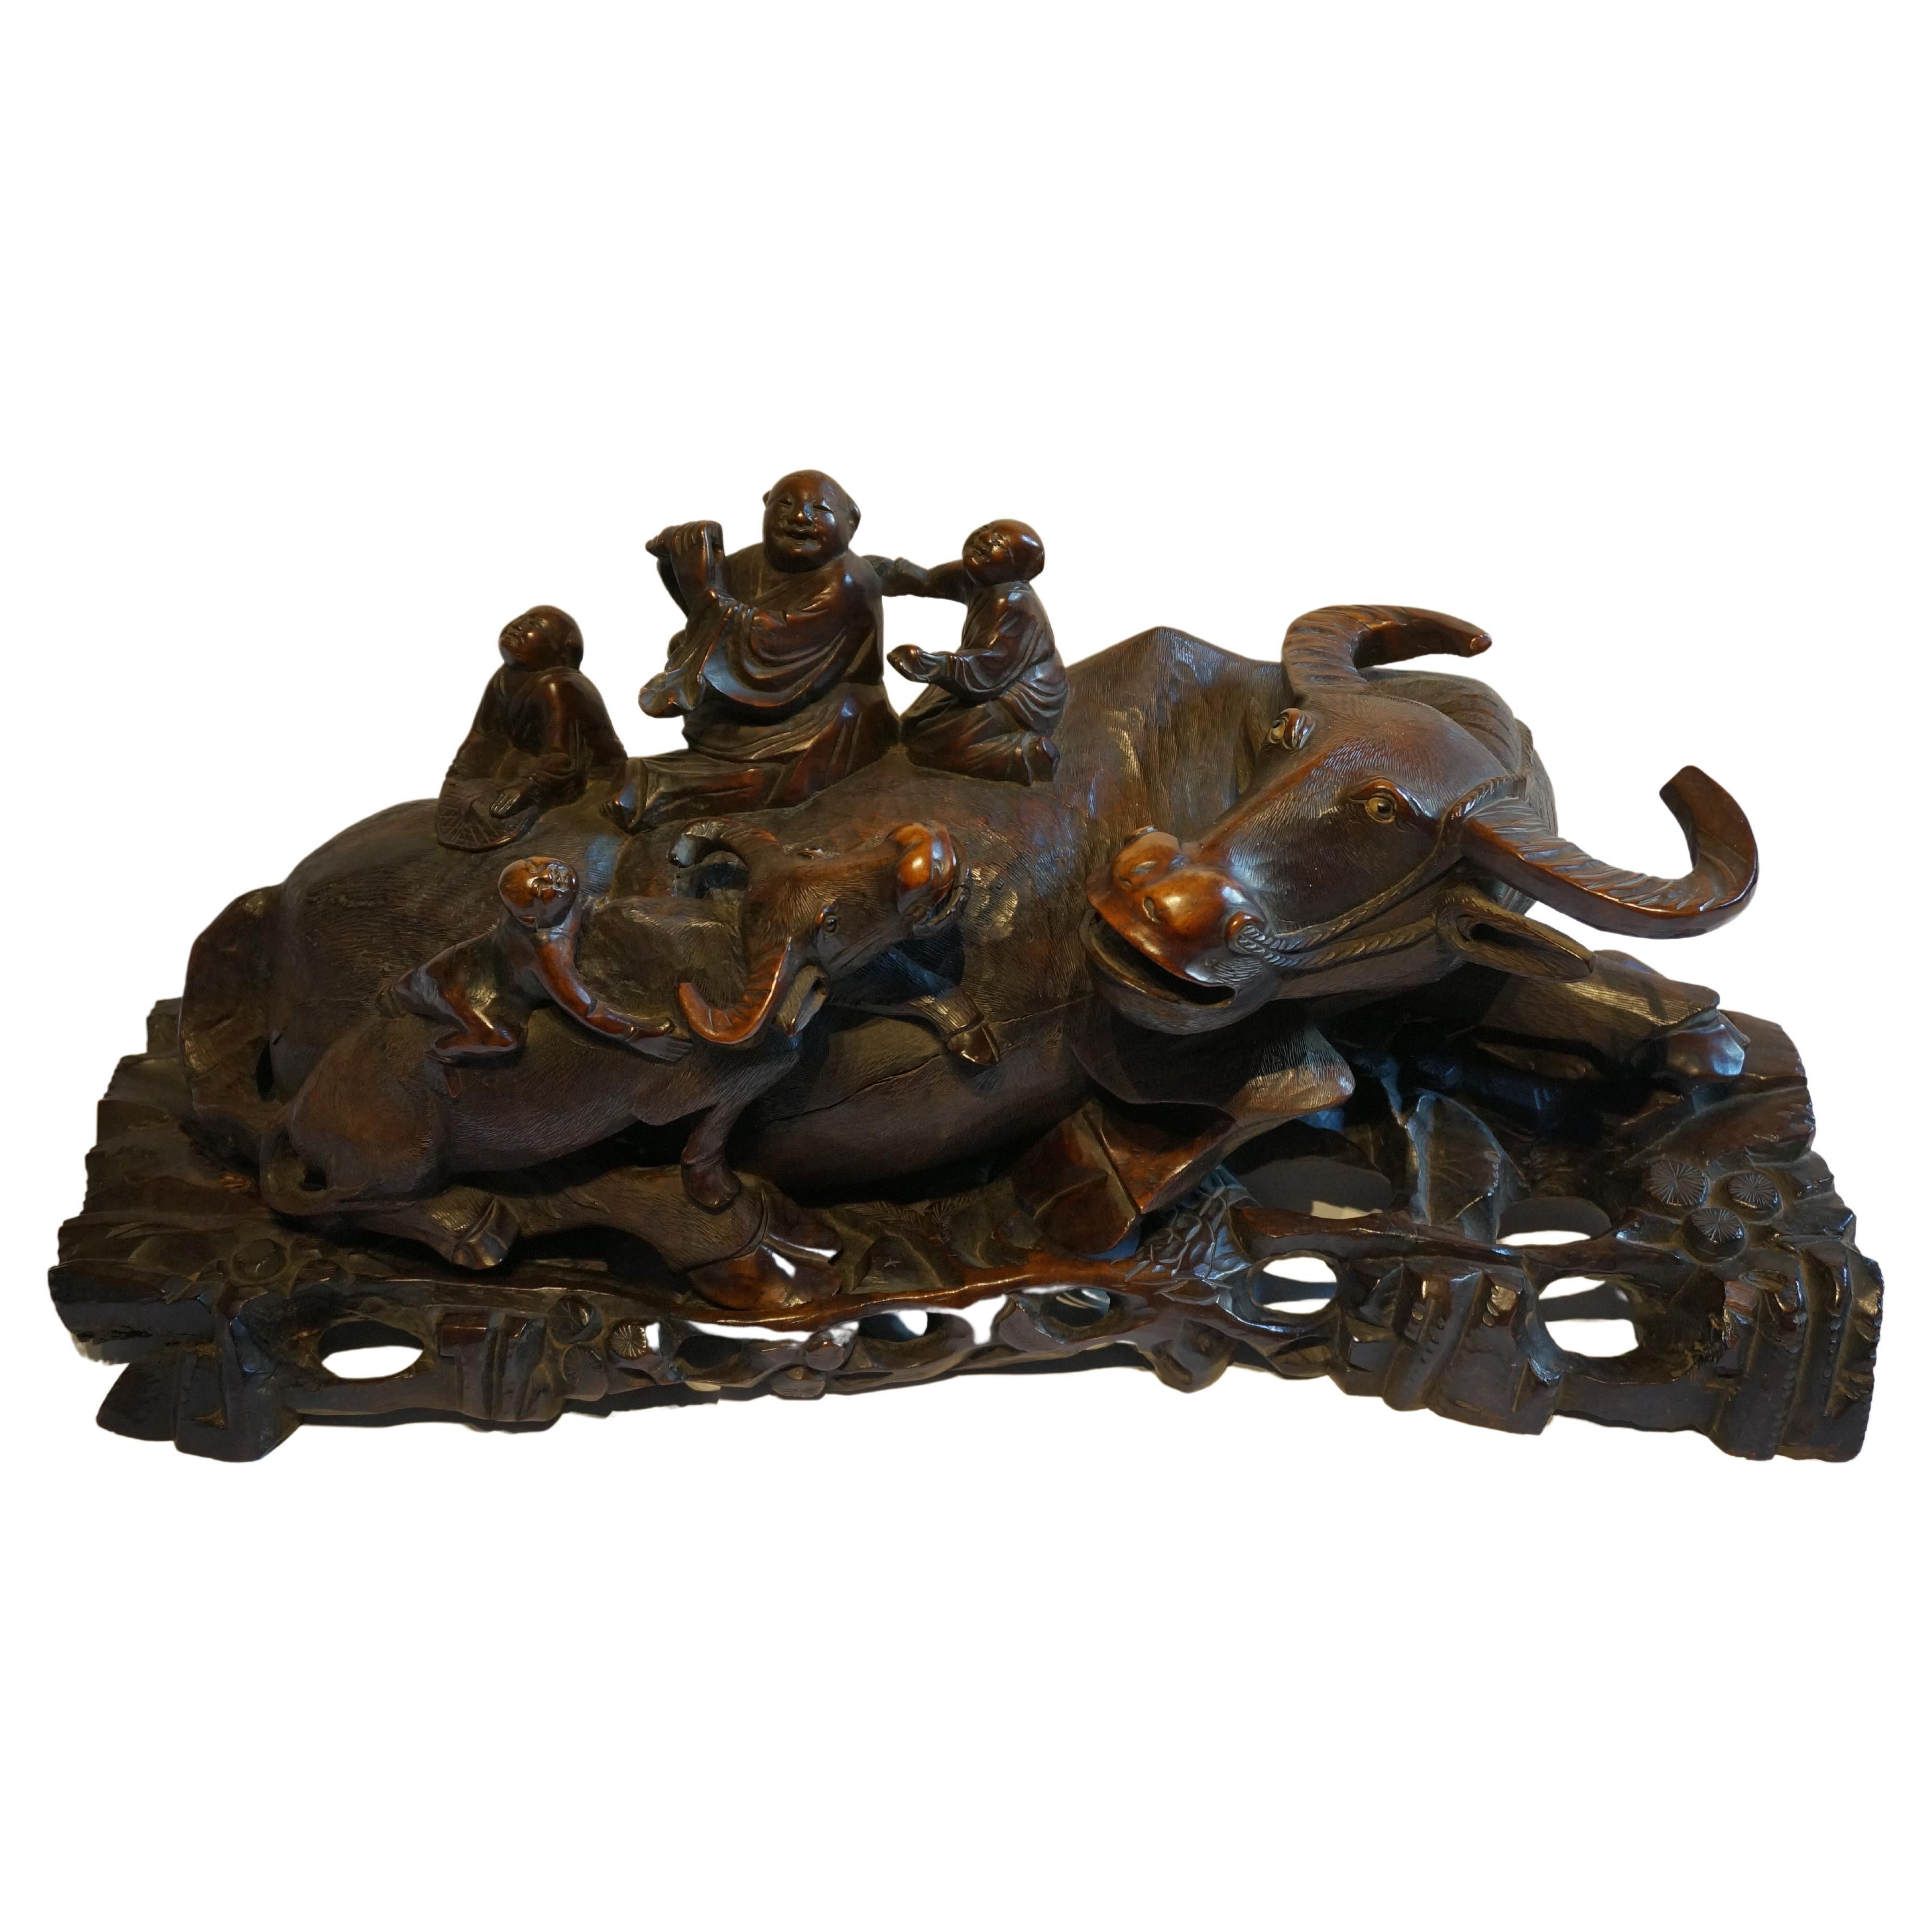 Large handcarved Asian wooden sculpture of a water buffalo with calf and figures